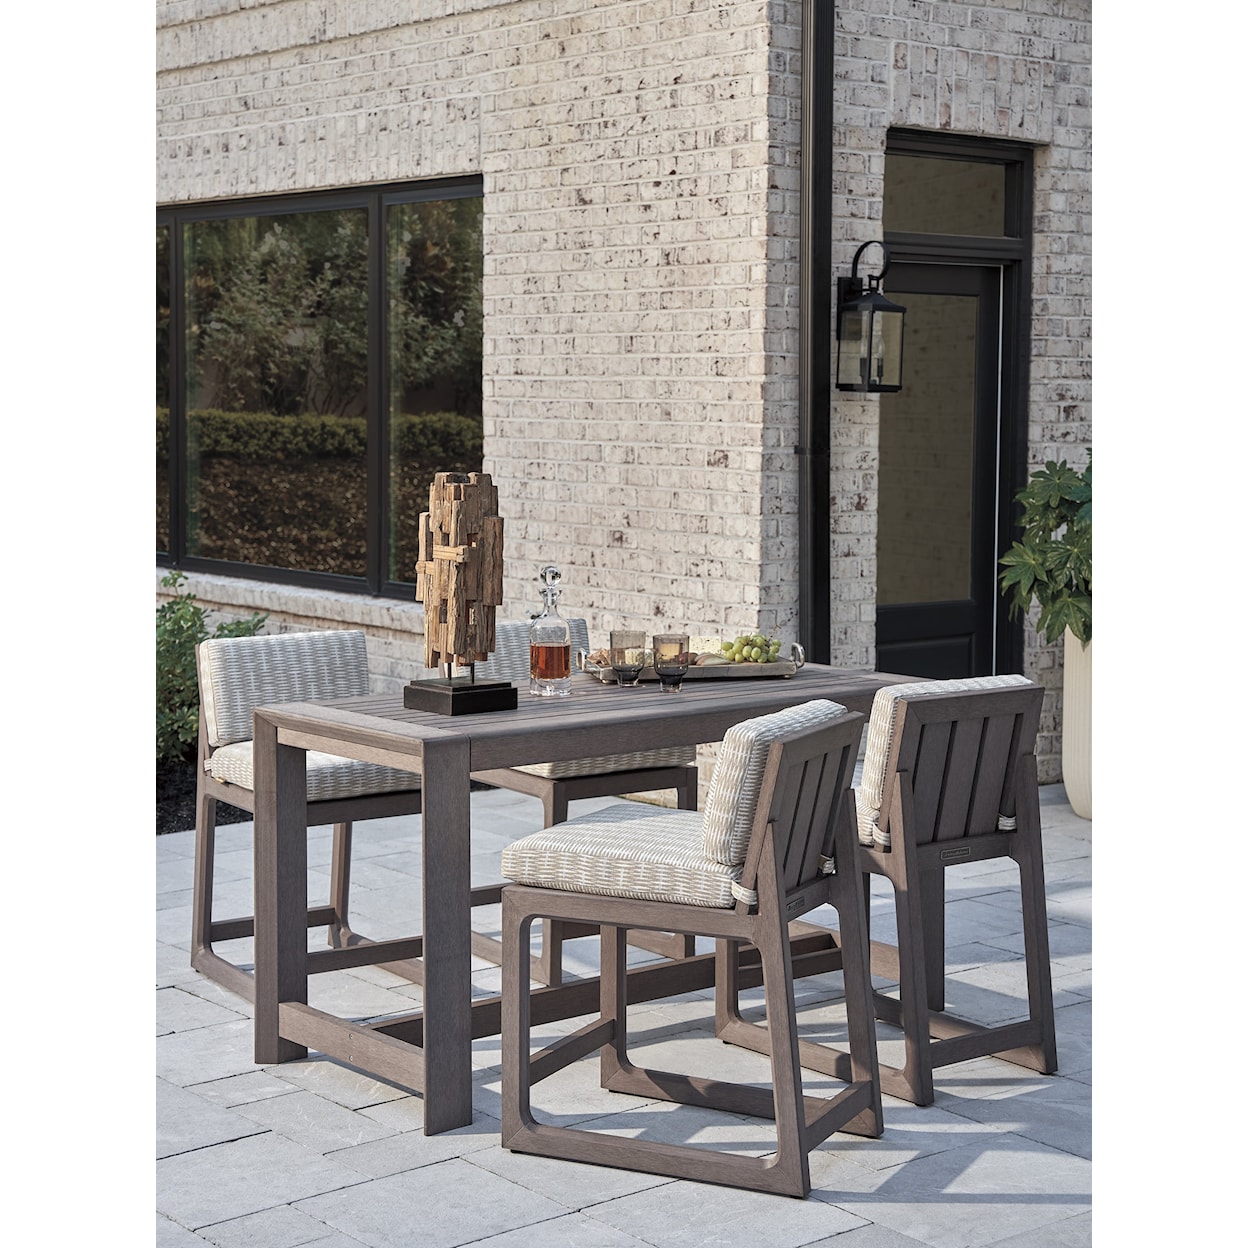 Tommy Bahama Outdoor Living Mozambique Outdoor Counter Stool